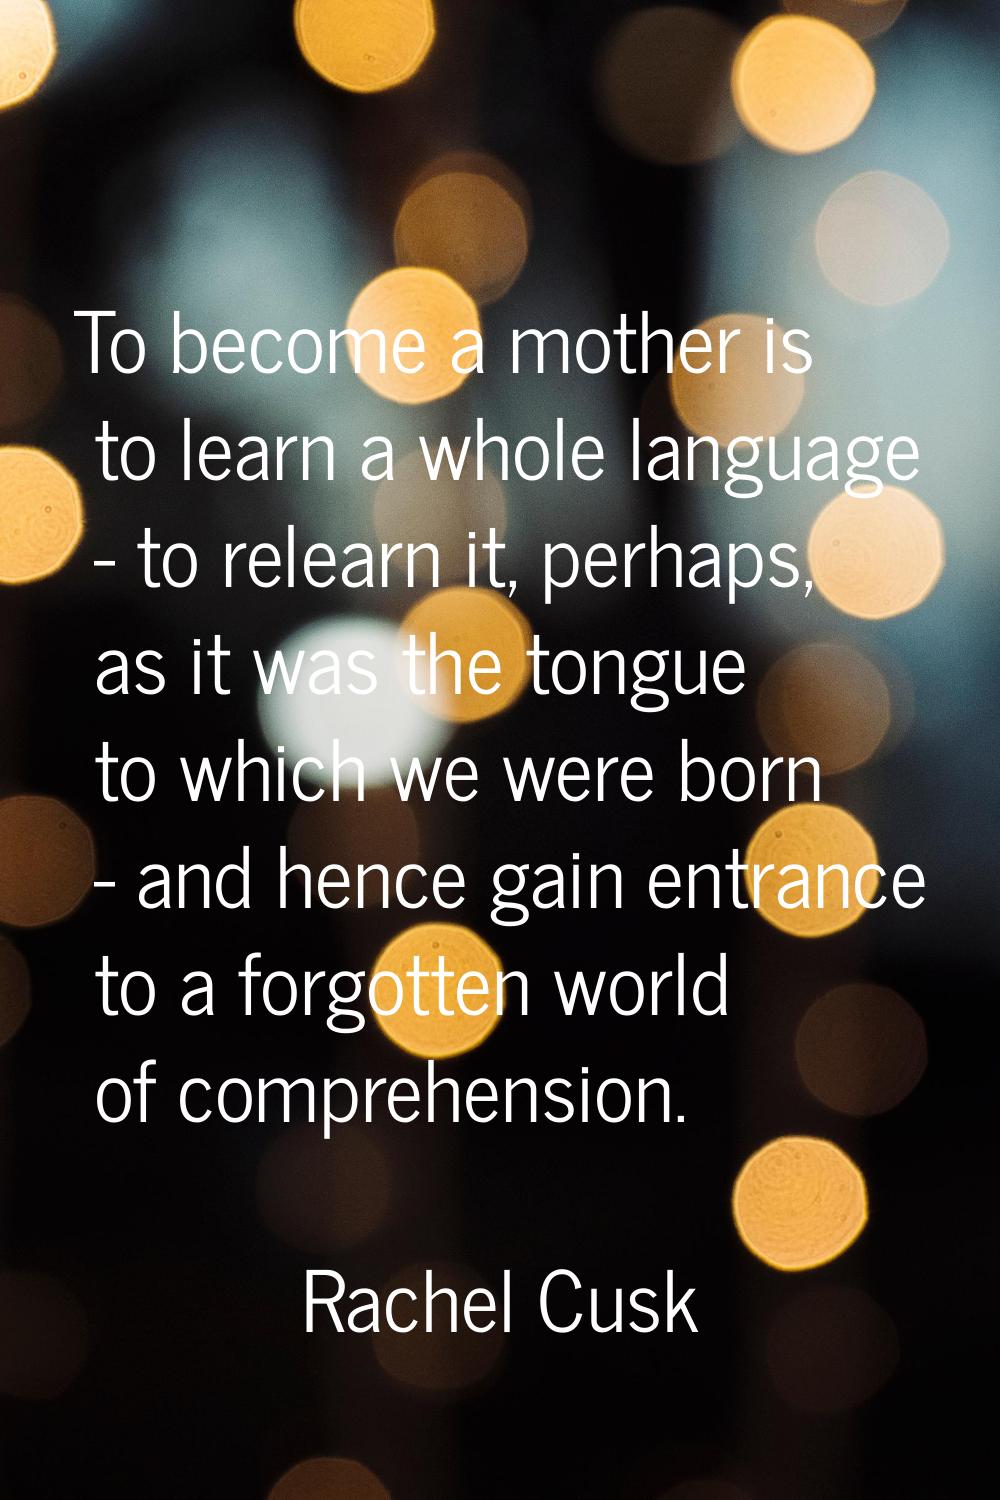 To become a mother is to learn a whole language - to relearn it, perhaps, as it was the tongue to w